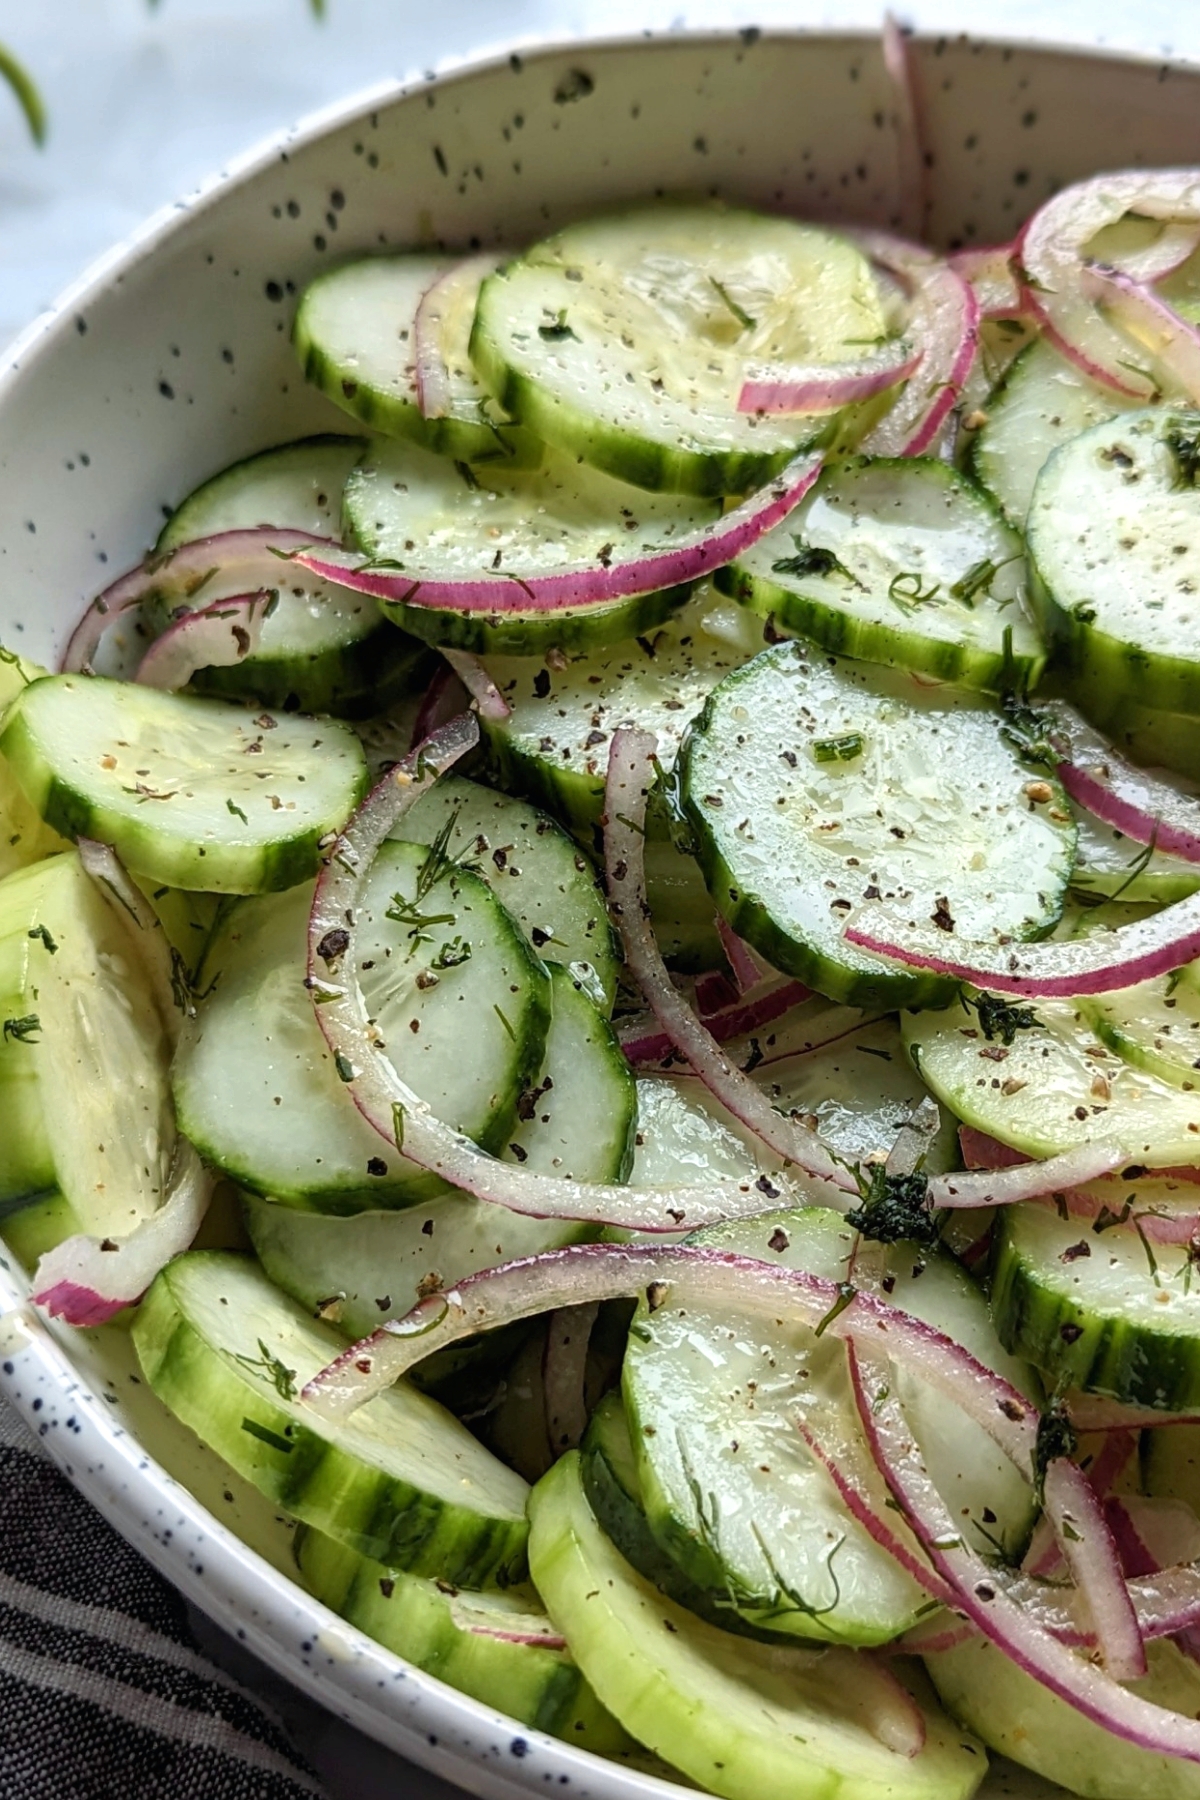 unsalted salad recipe with cucumber and red onion salad with rice wine vinegar dressing family recipes heart healthy classic salads